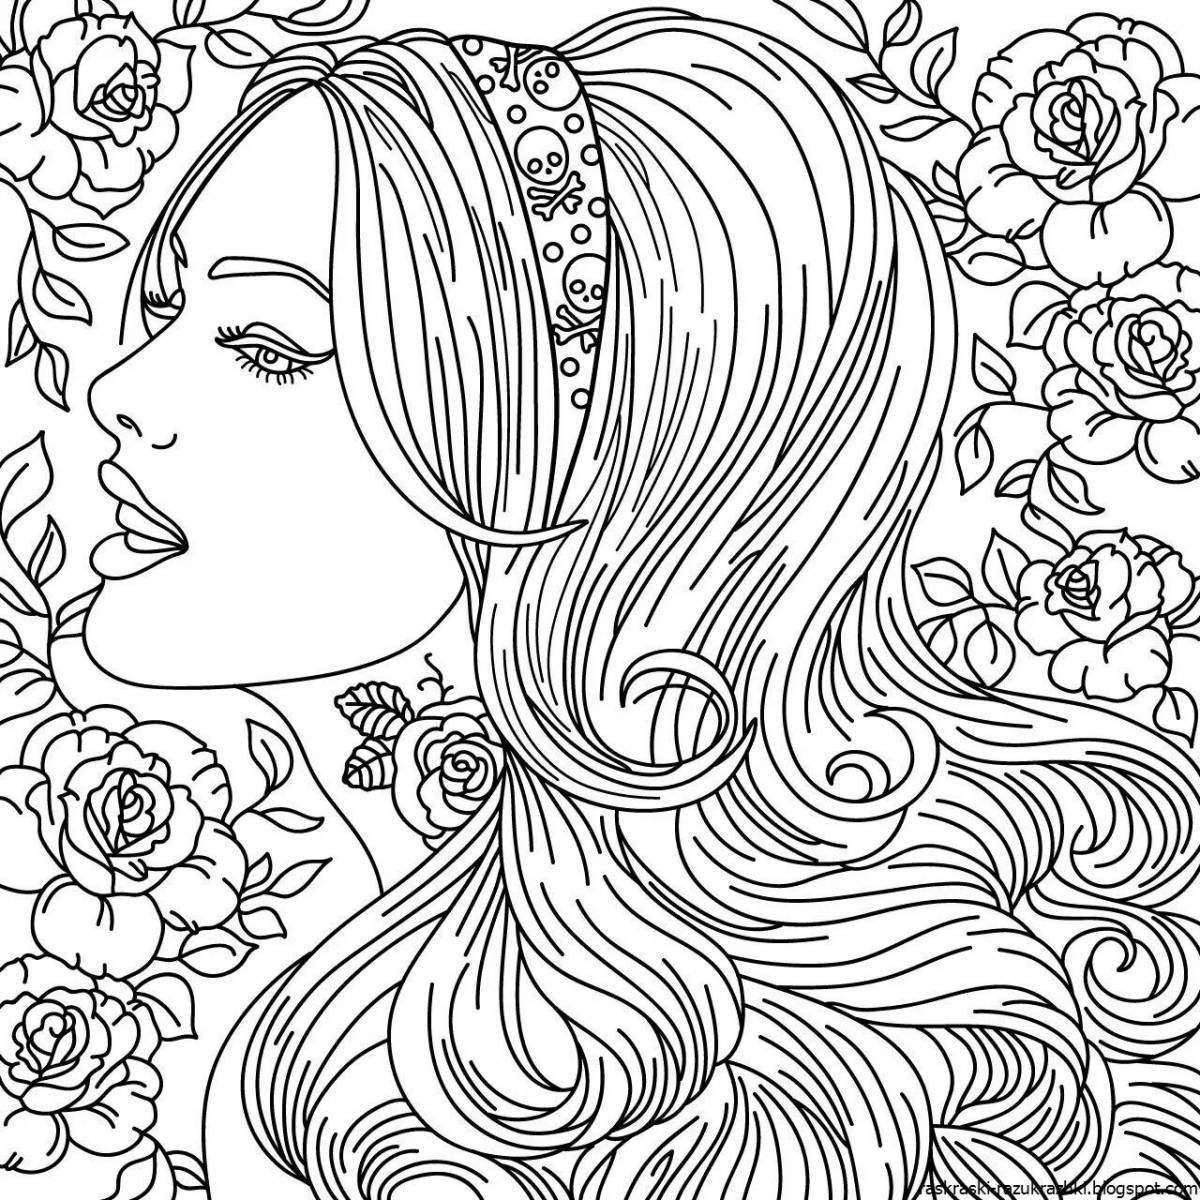 Inviting wildberry anti-stress coloring book